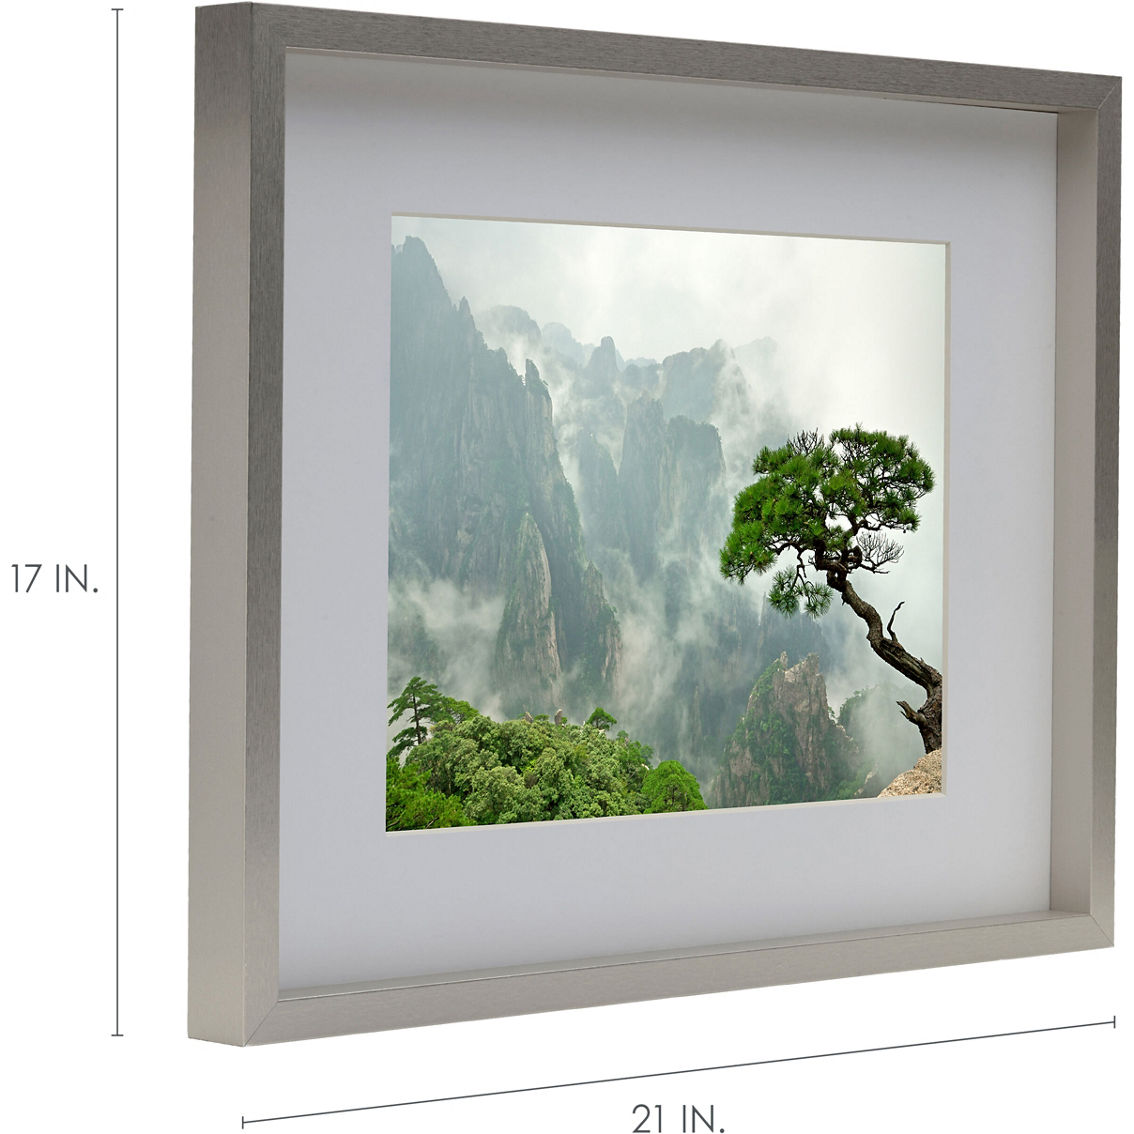 Mikasa Home 11x14 / 16x20 Silver Gallery Frame - Image 2 of 6